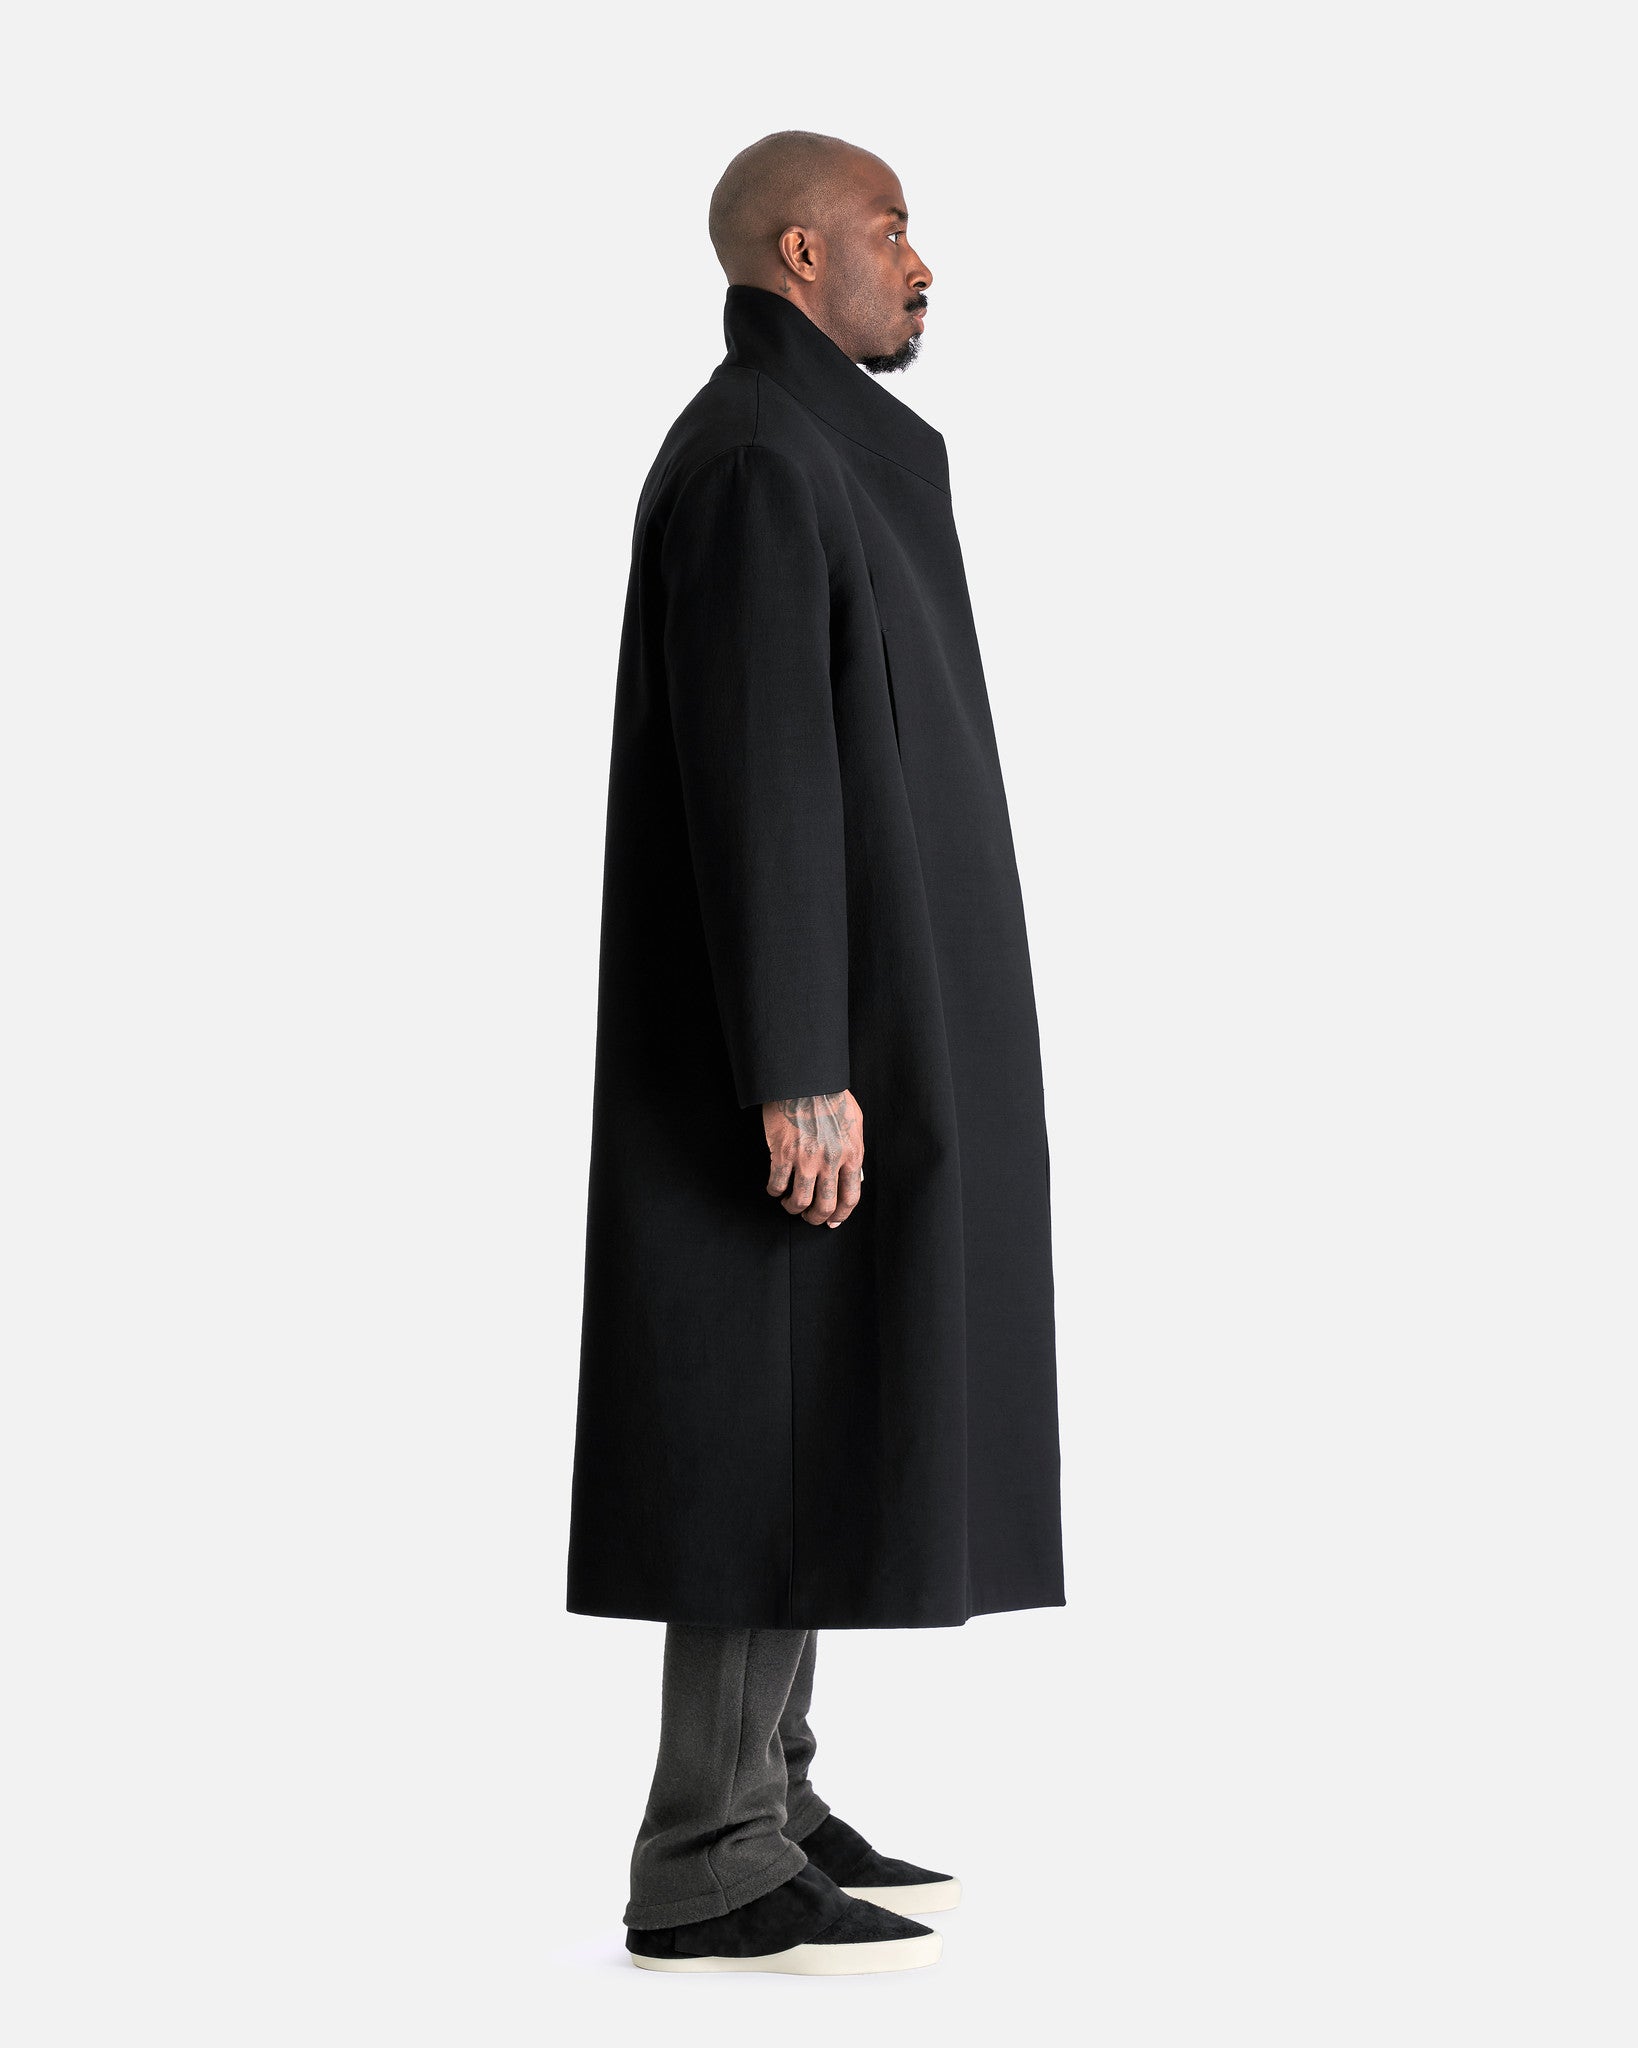 Fear of God Men's Coat Stand Collar Relaxed Overcoat in Black